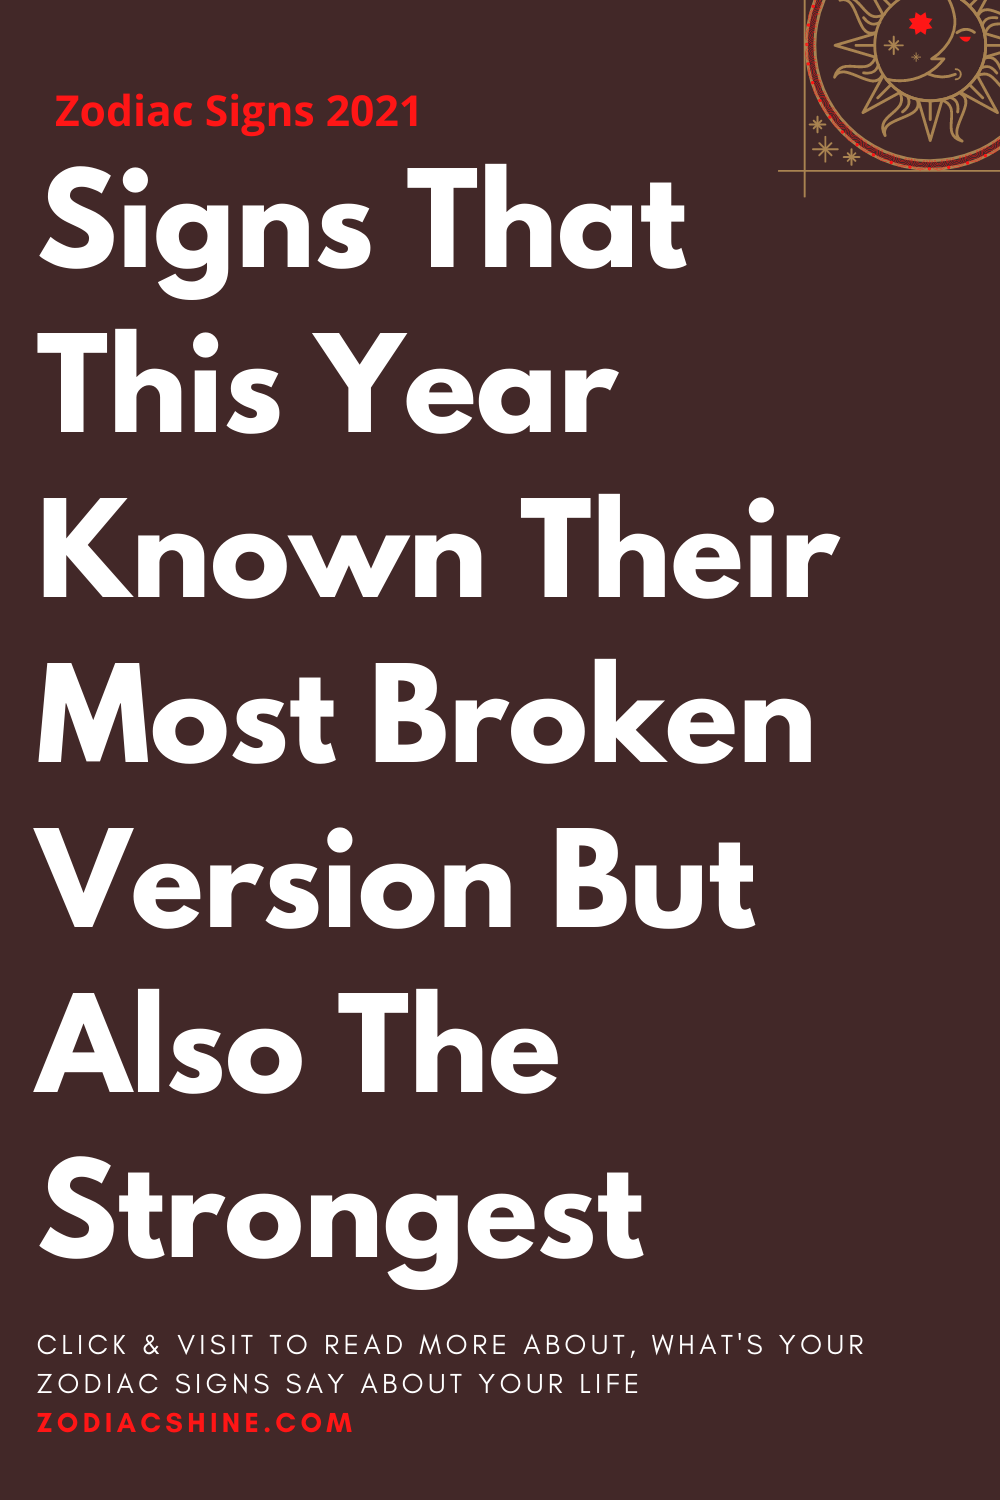 Signs That This Year Known Their Most Broken Version But Also The Strongest